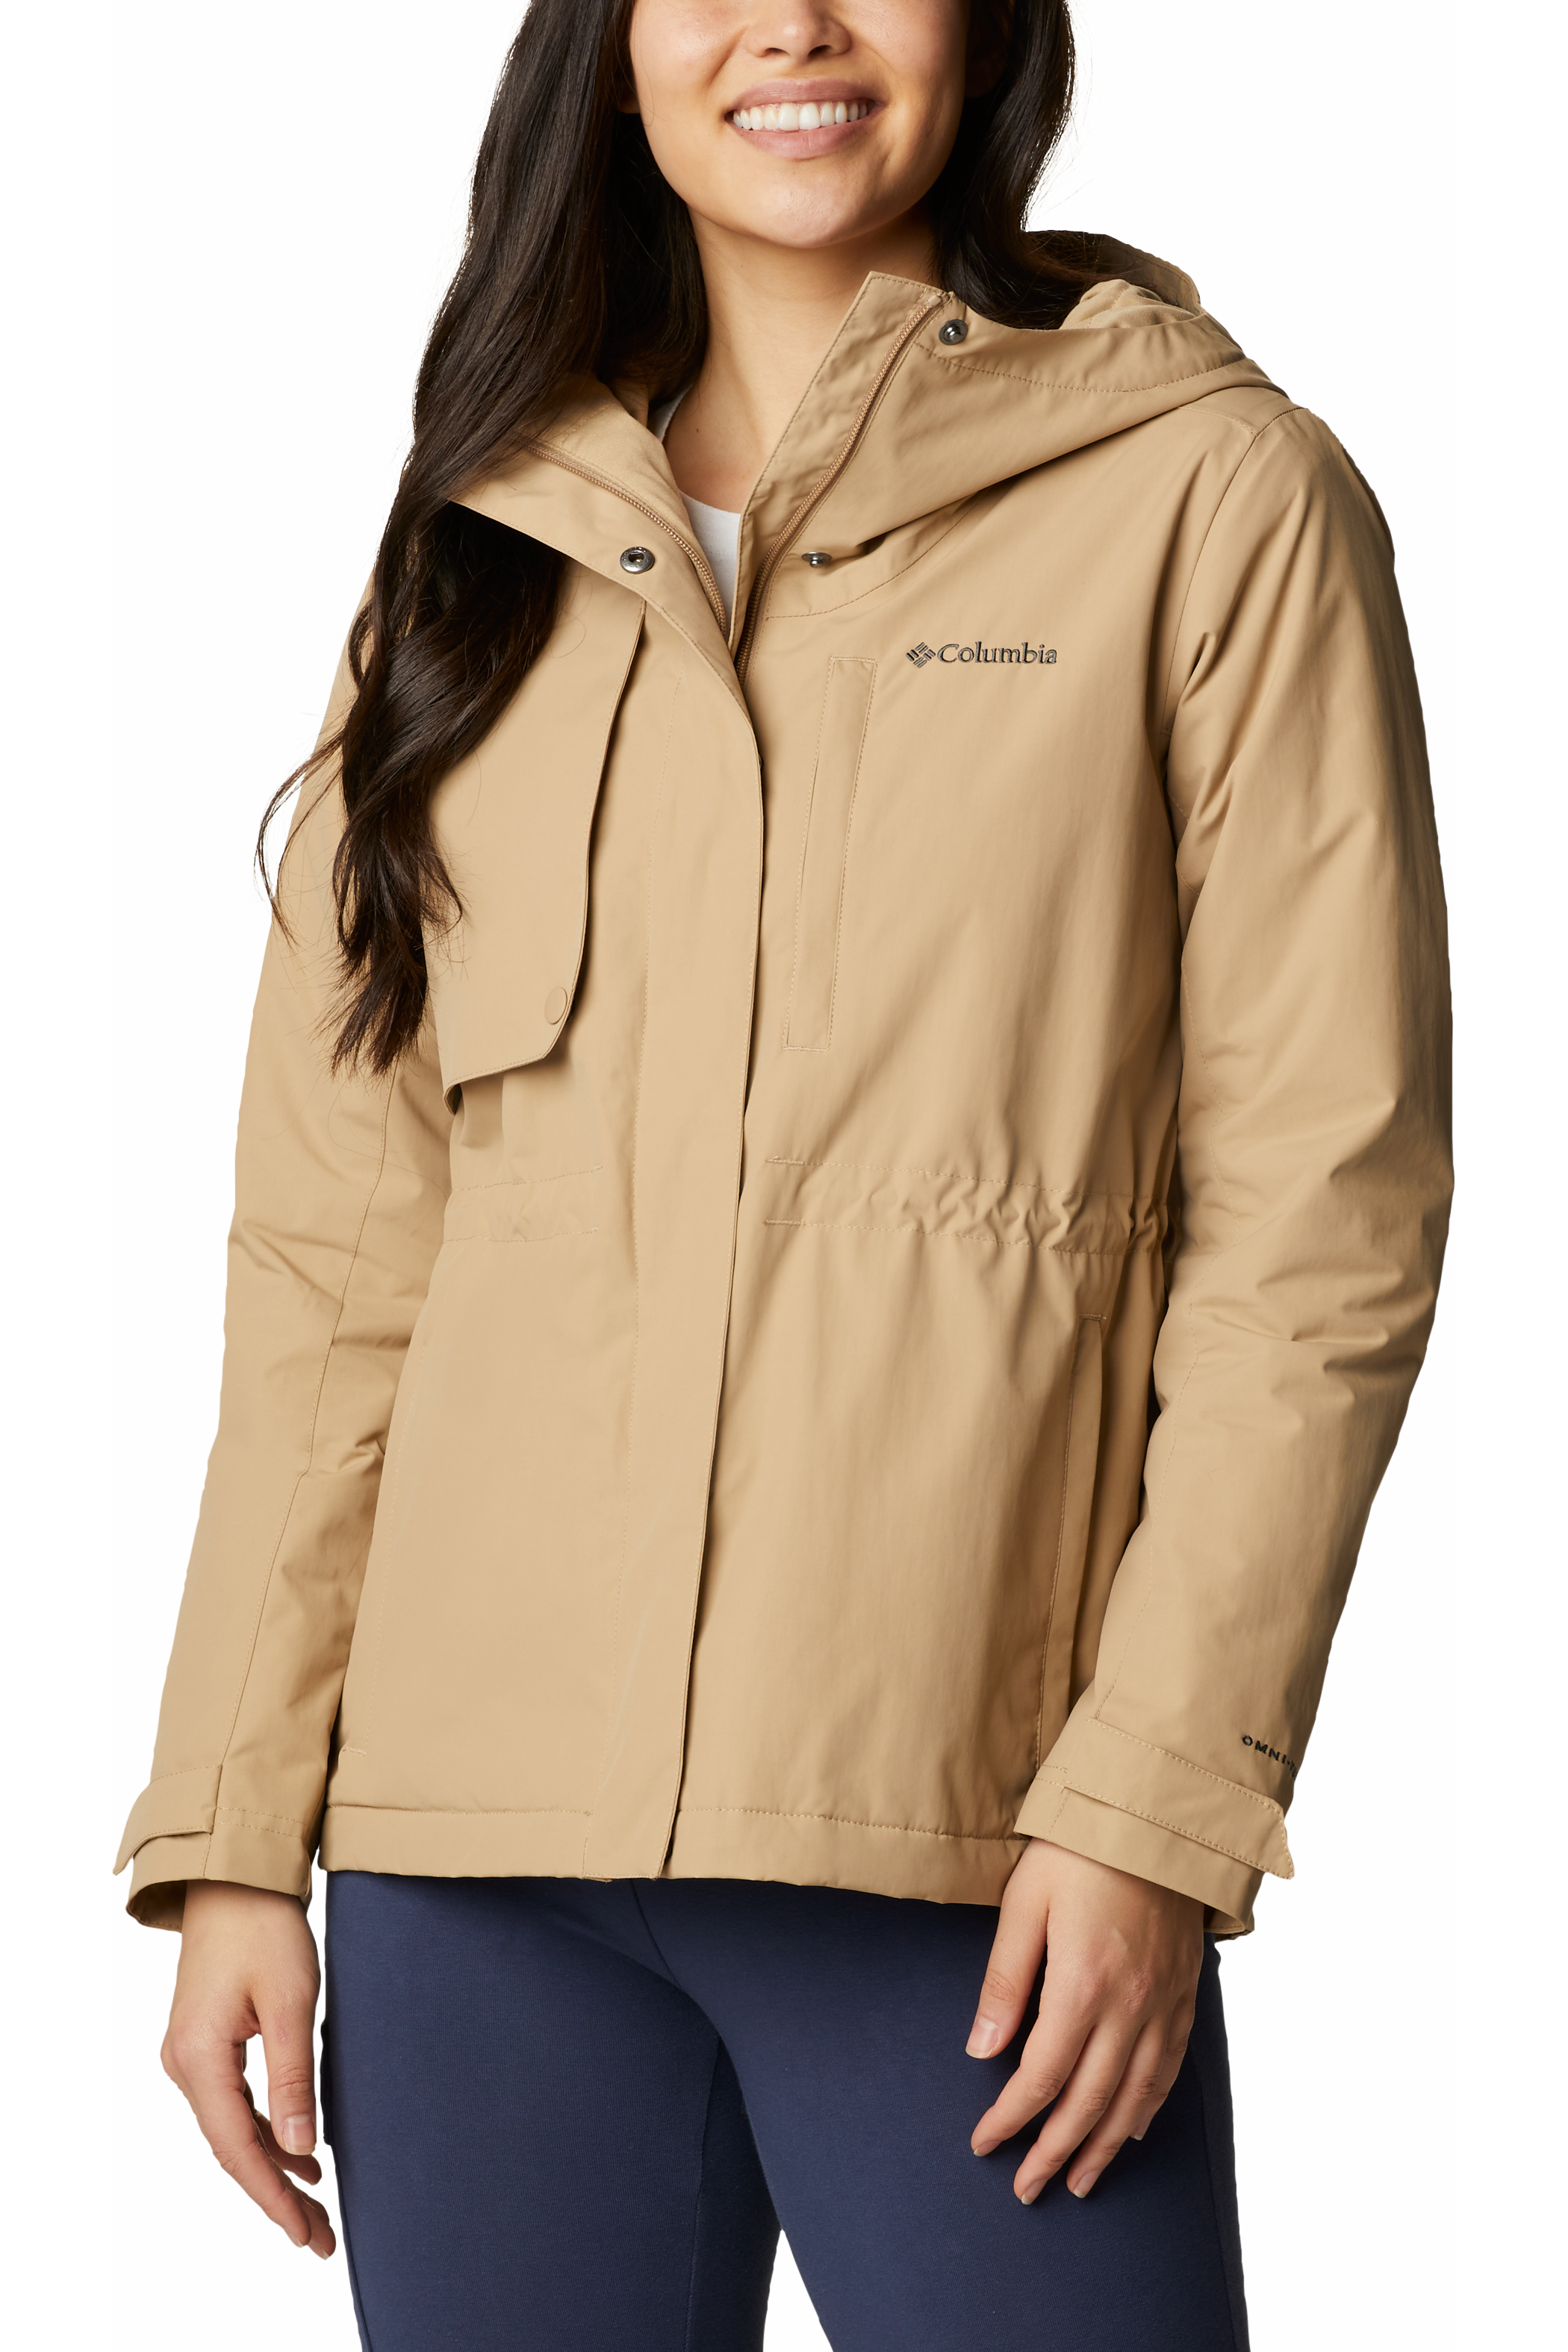 Columbia Hadley Trail Jacket - Style 1955181214. front